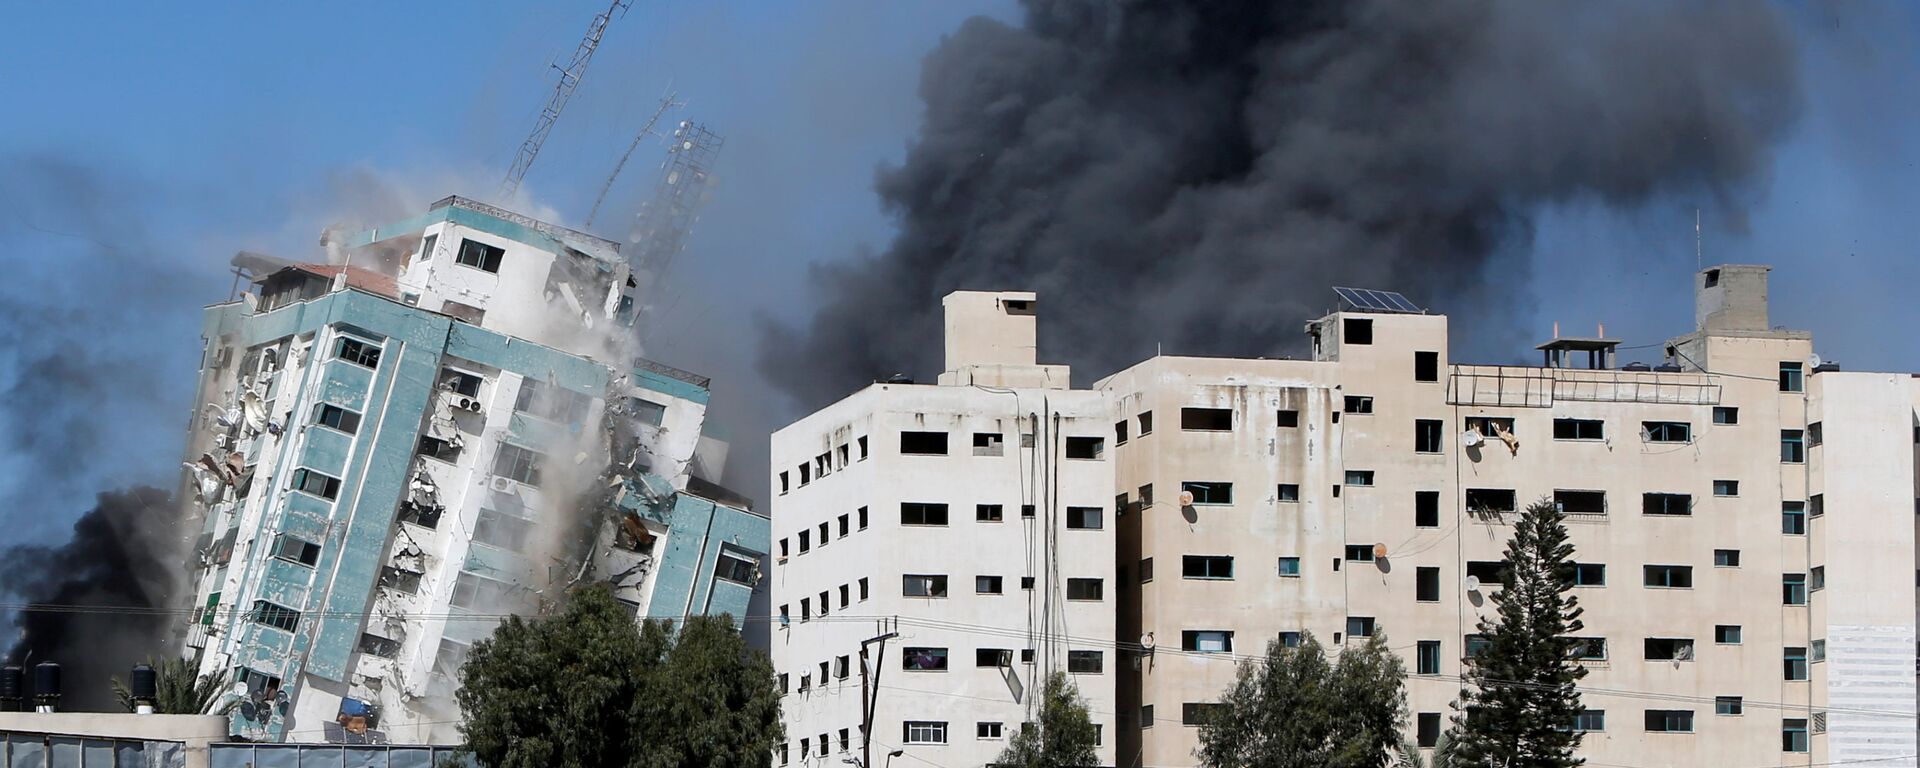 A tower housing AP, Al Jazeera offices collapses after Israeli missile strikes in Gaza city, May 15, 2021.  - Sputnik International, 1920, 19.11.2021